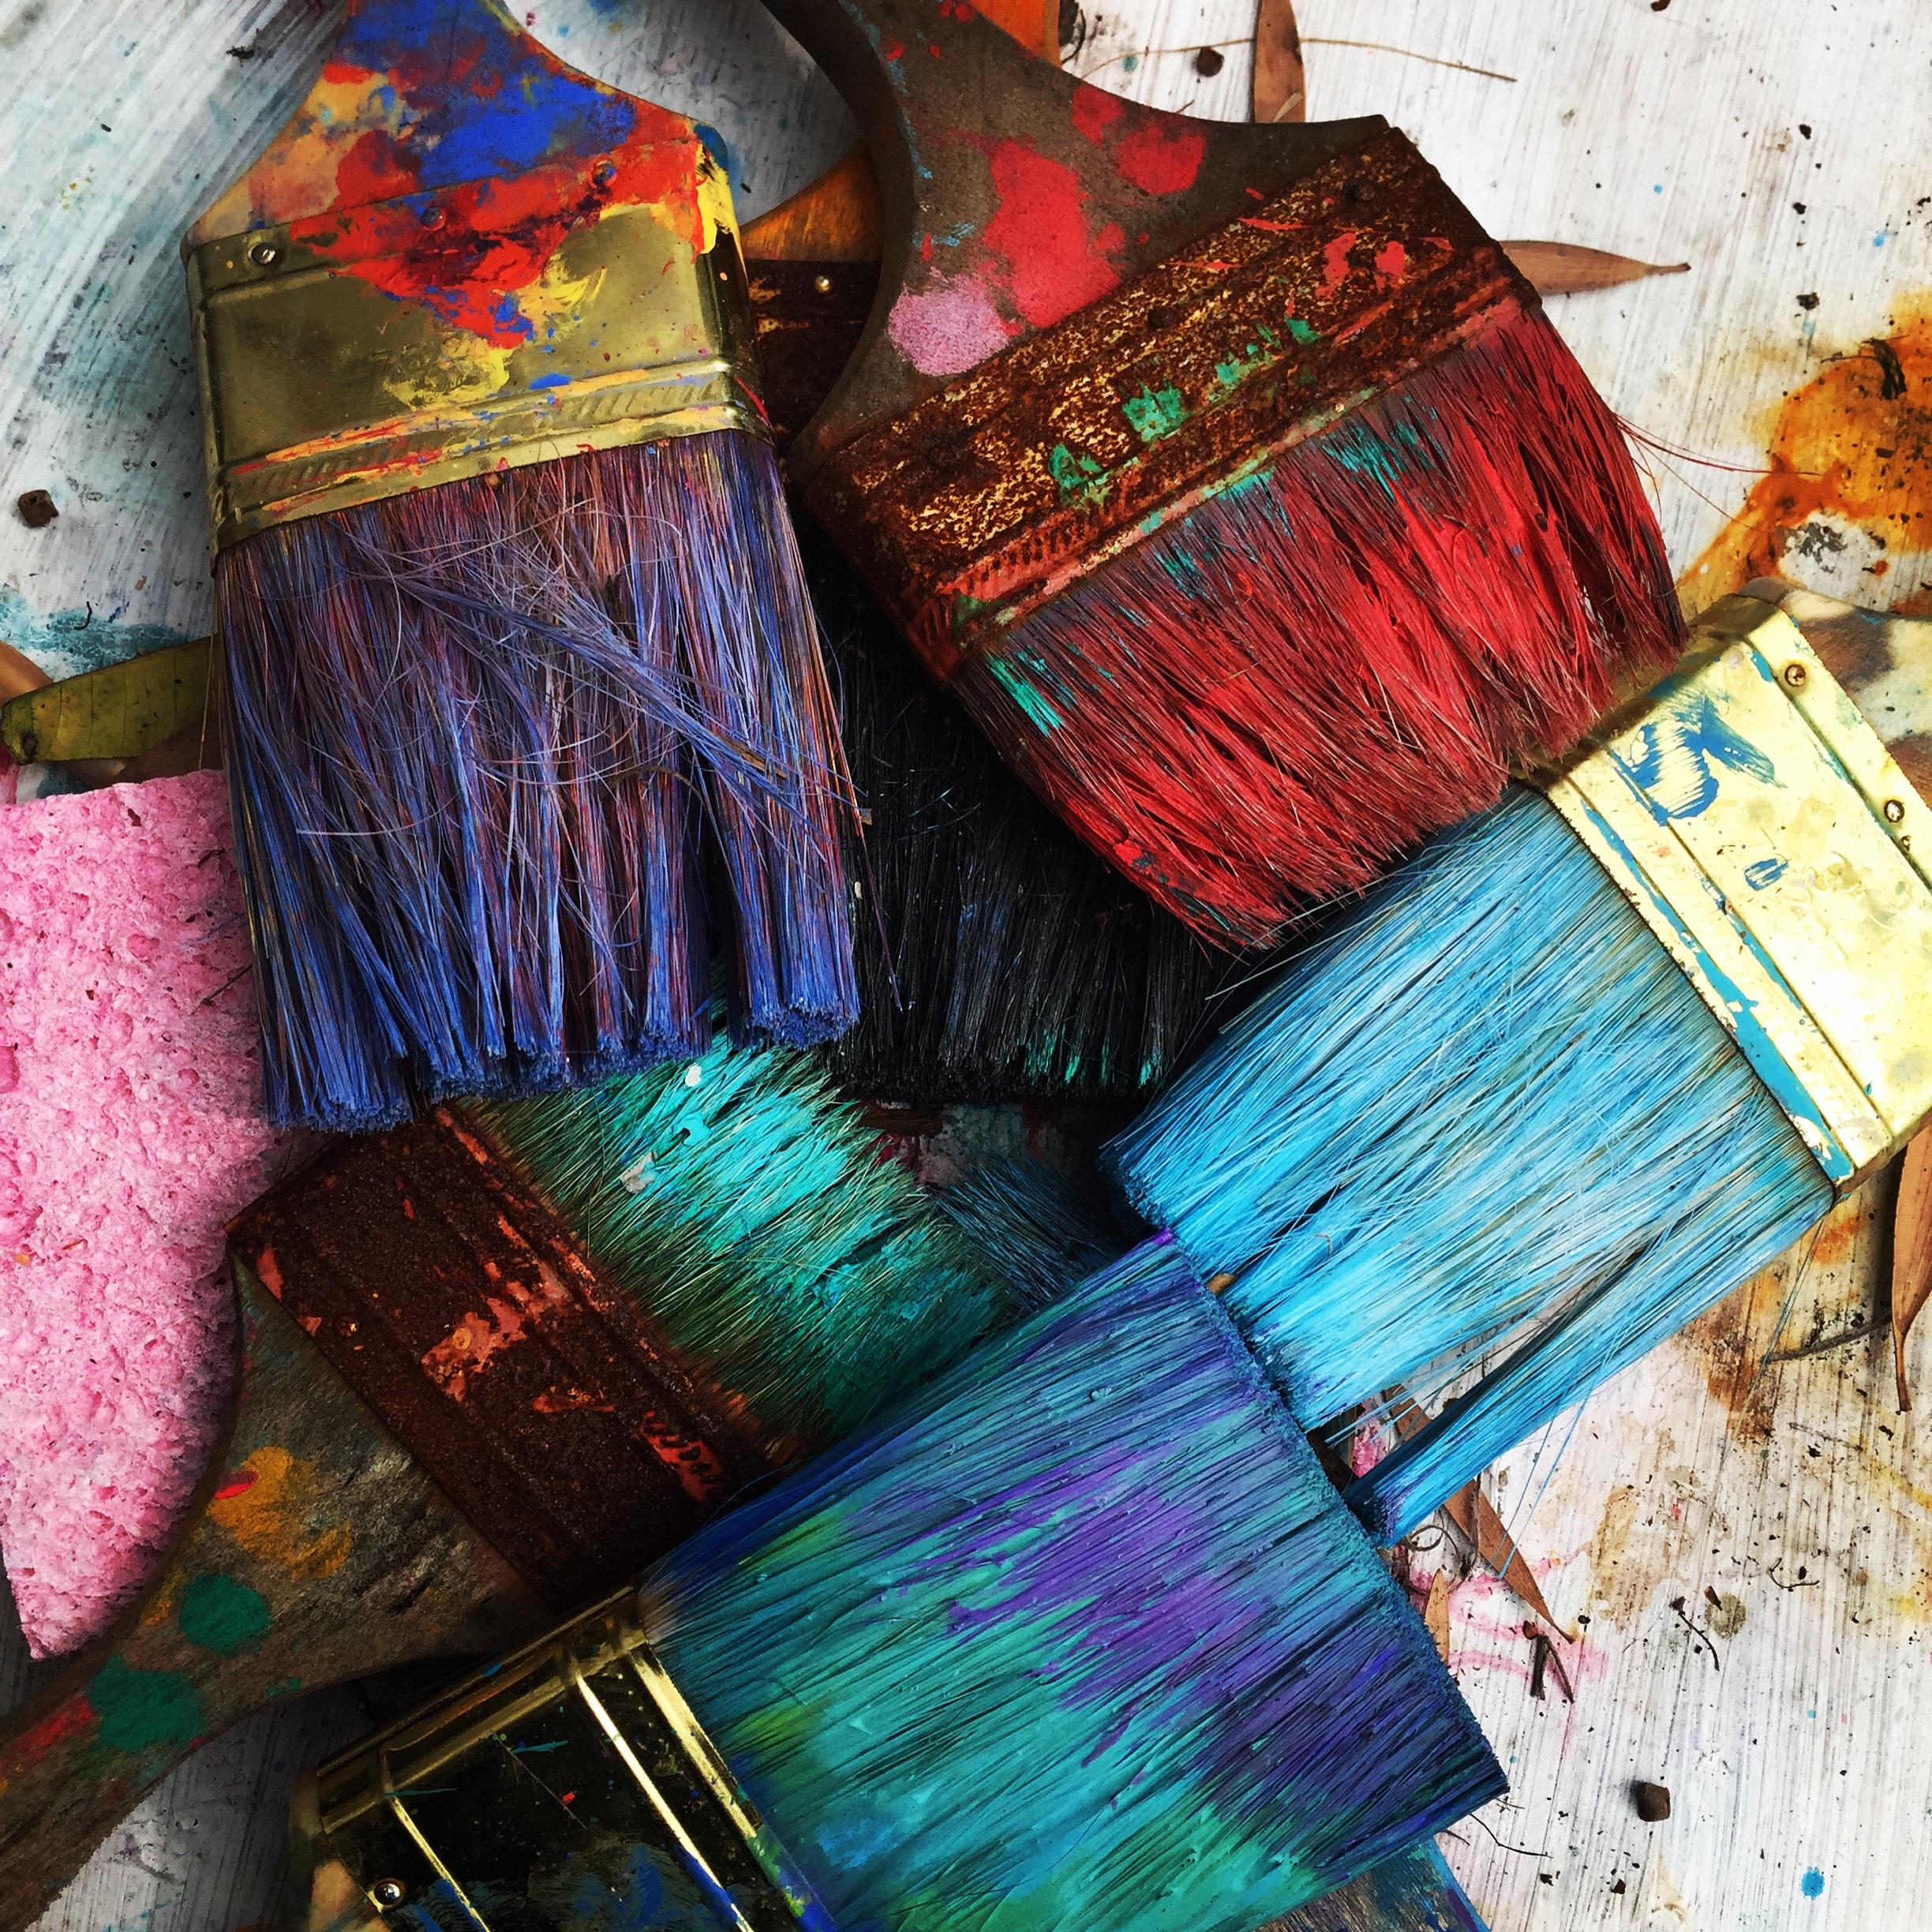 Artistic photo of paint brushes representing a creative painting motif